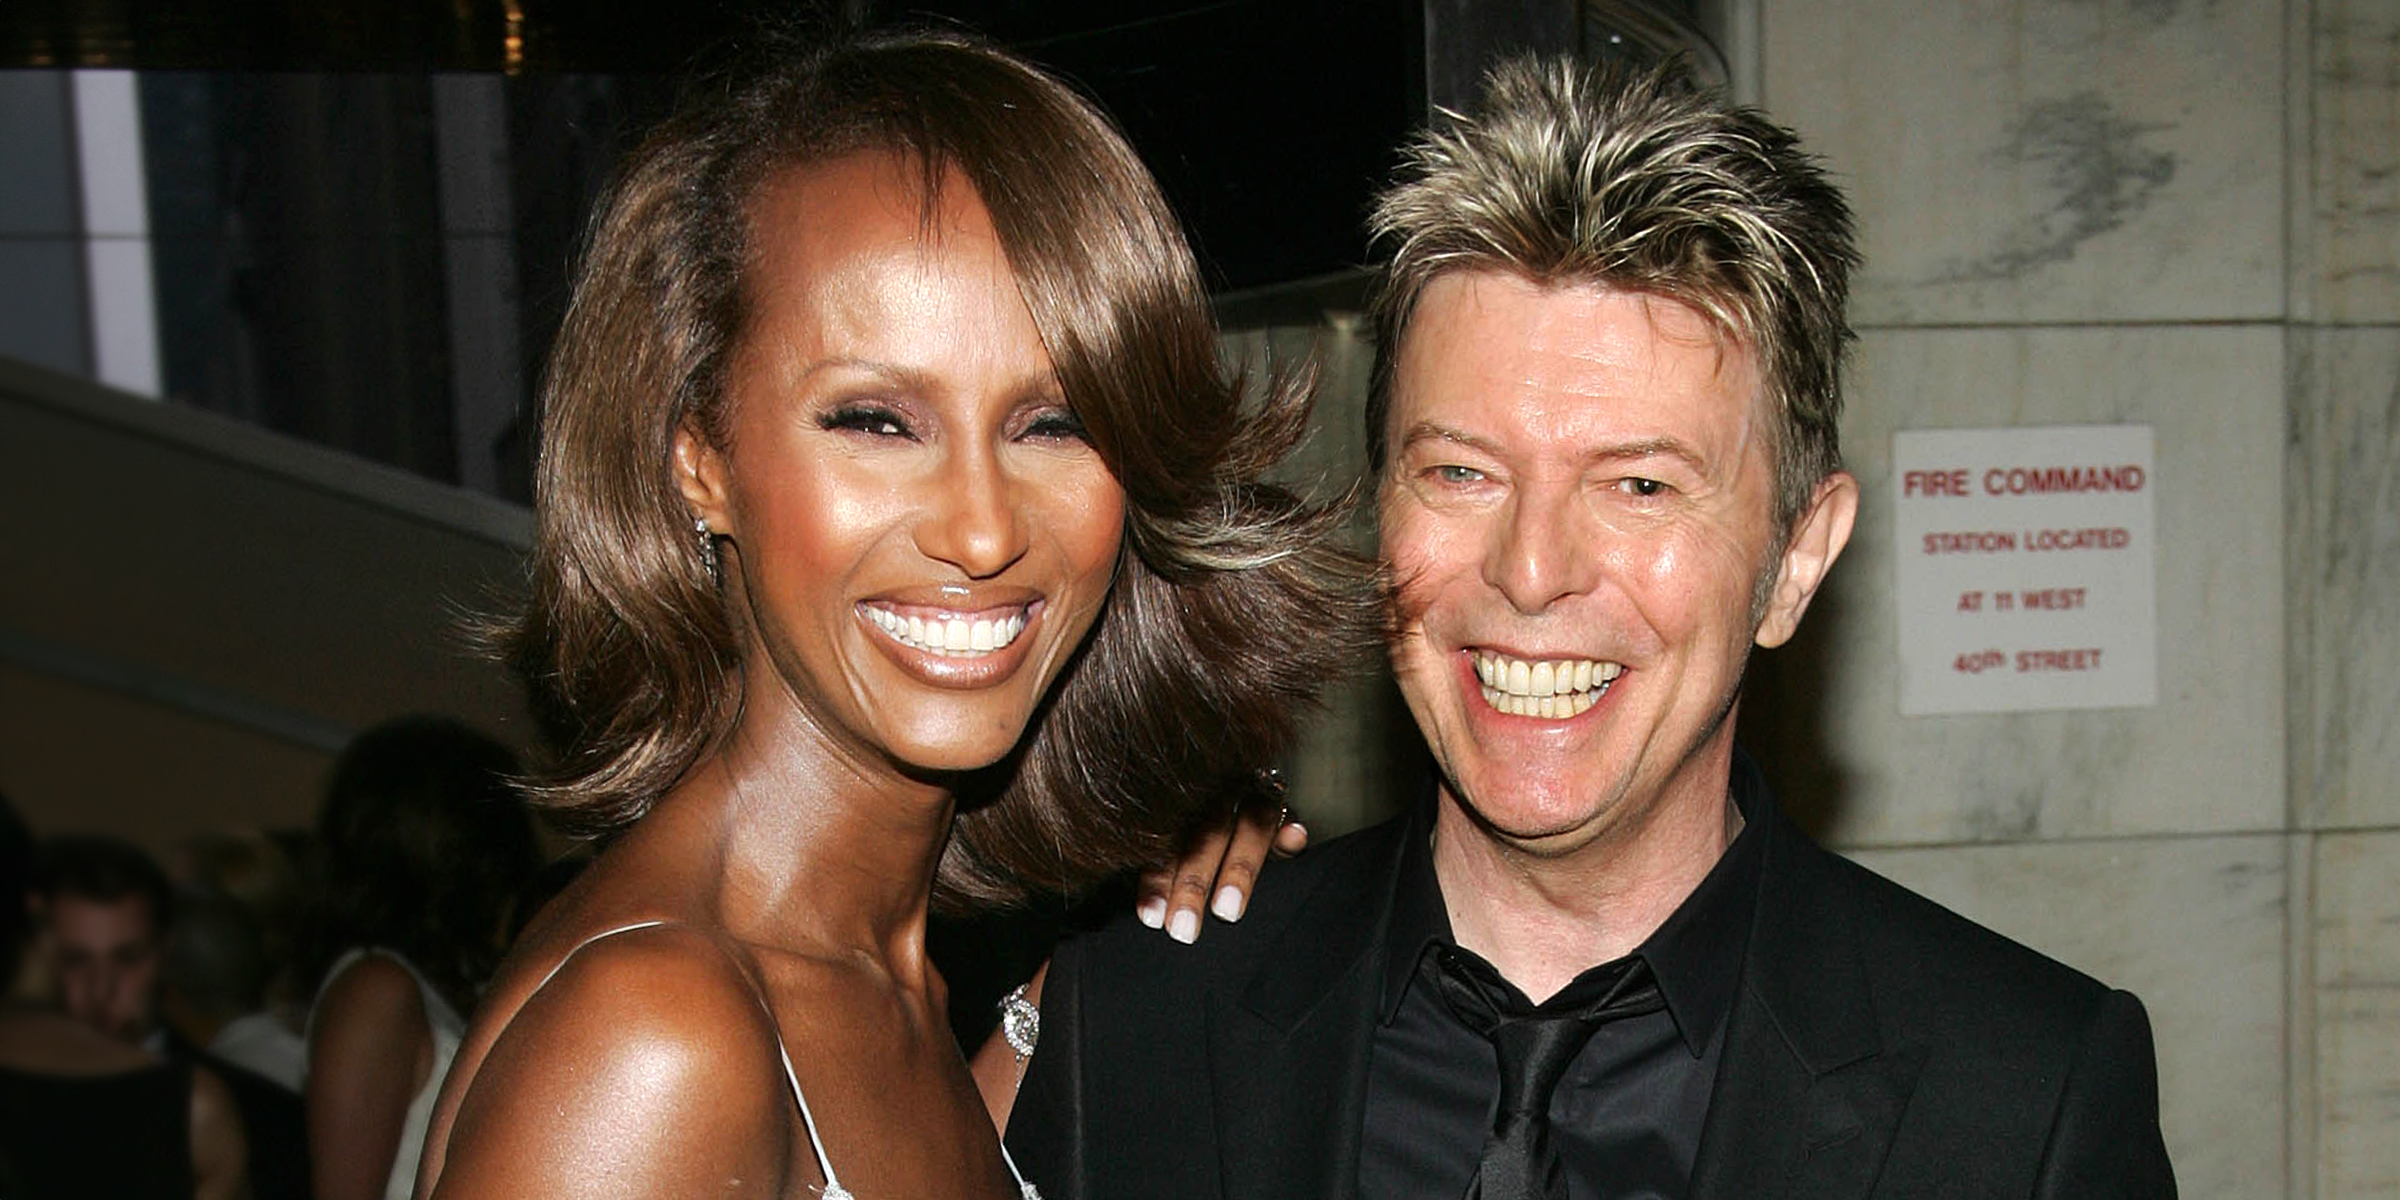 Iman and David Bowie | Source: Getty Images